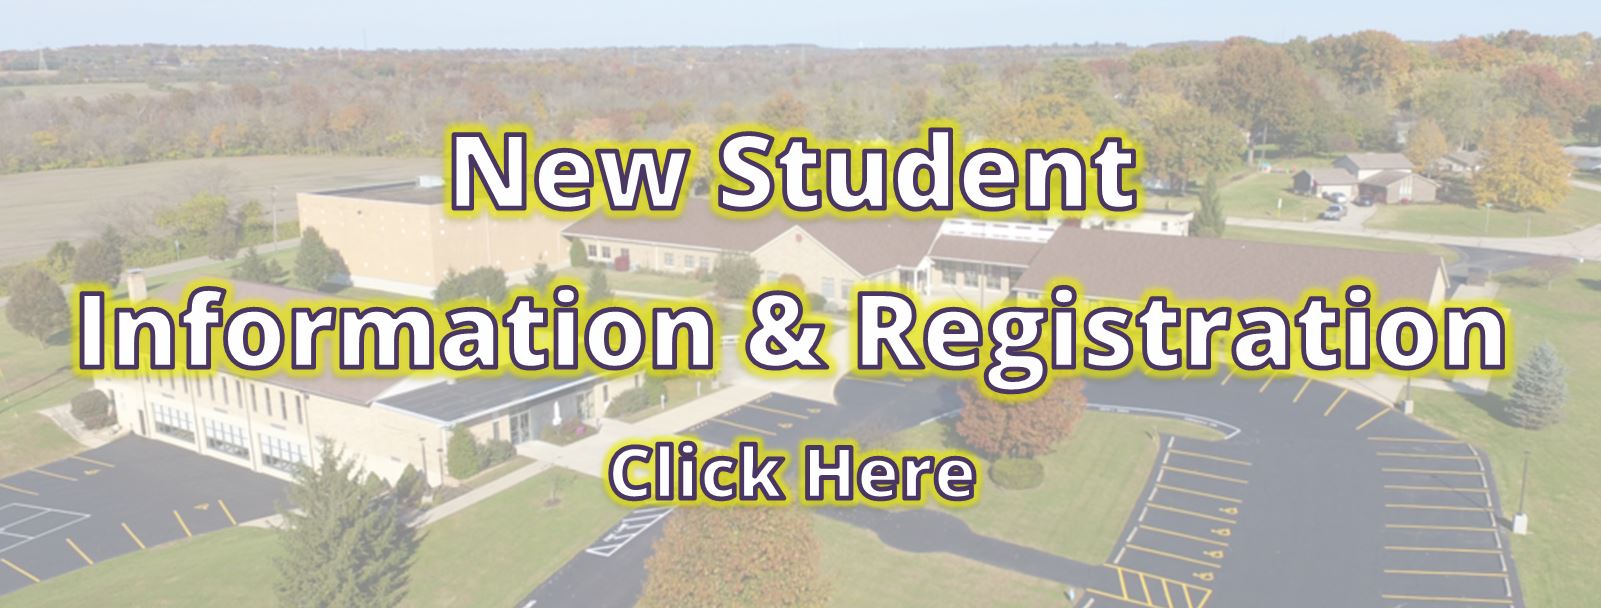 Queen of Peace School Open House - New Student Information & Registration Click Here